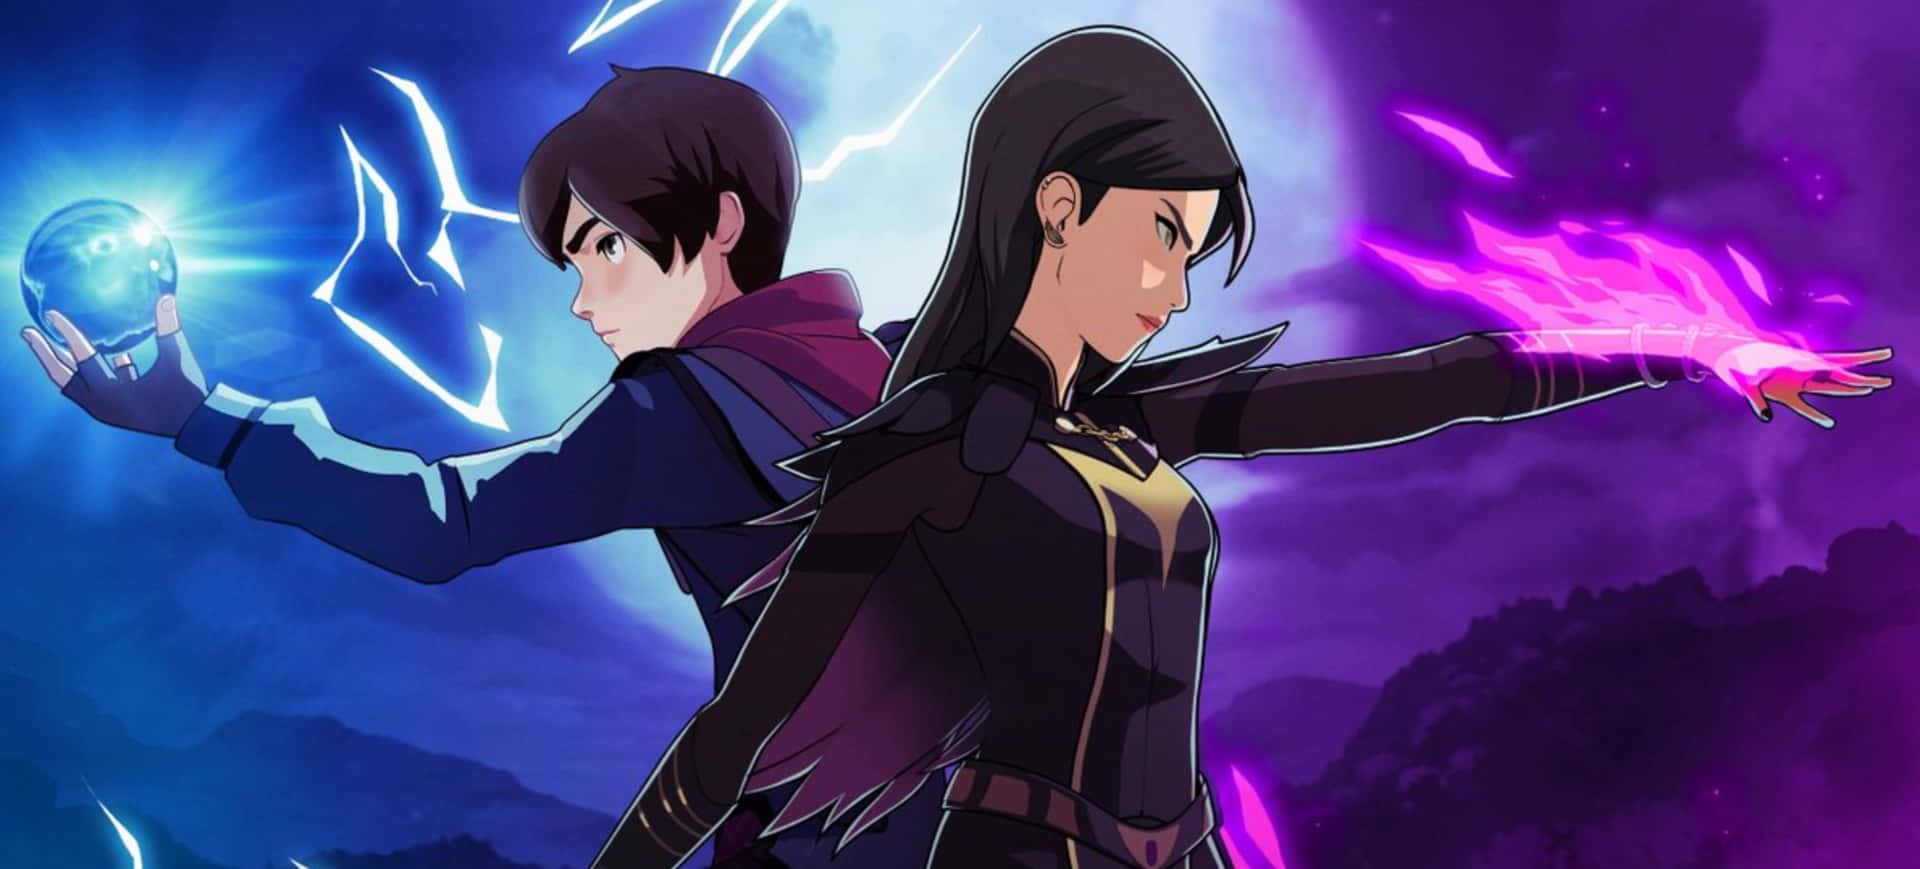 Meet Callum and his friends as they embark on an epic quest to save the Dragon Prince Wallpaper